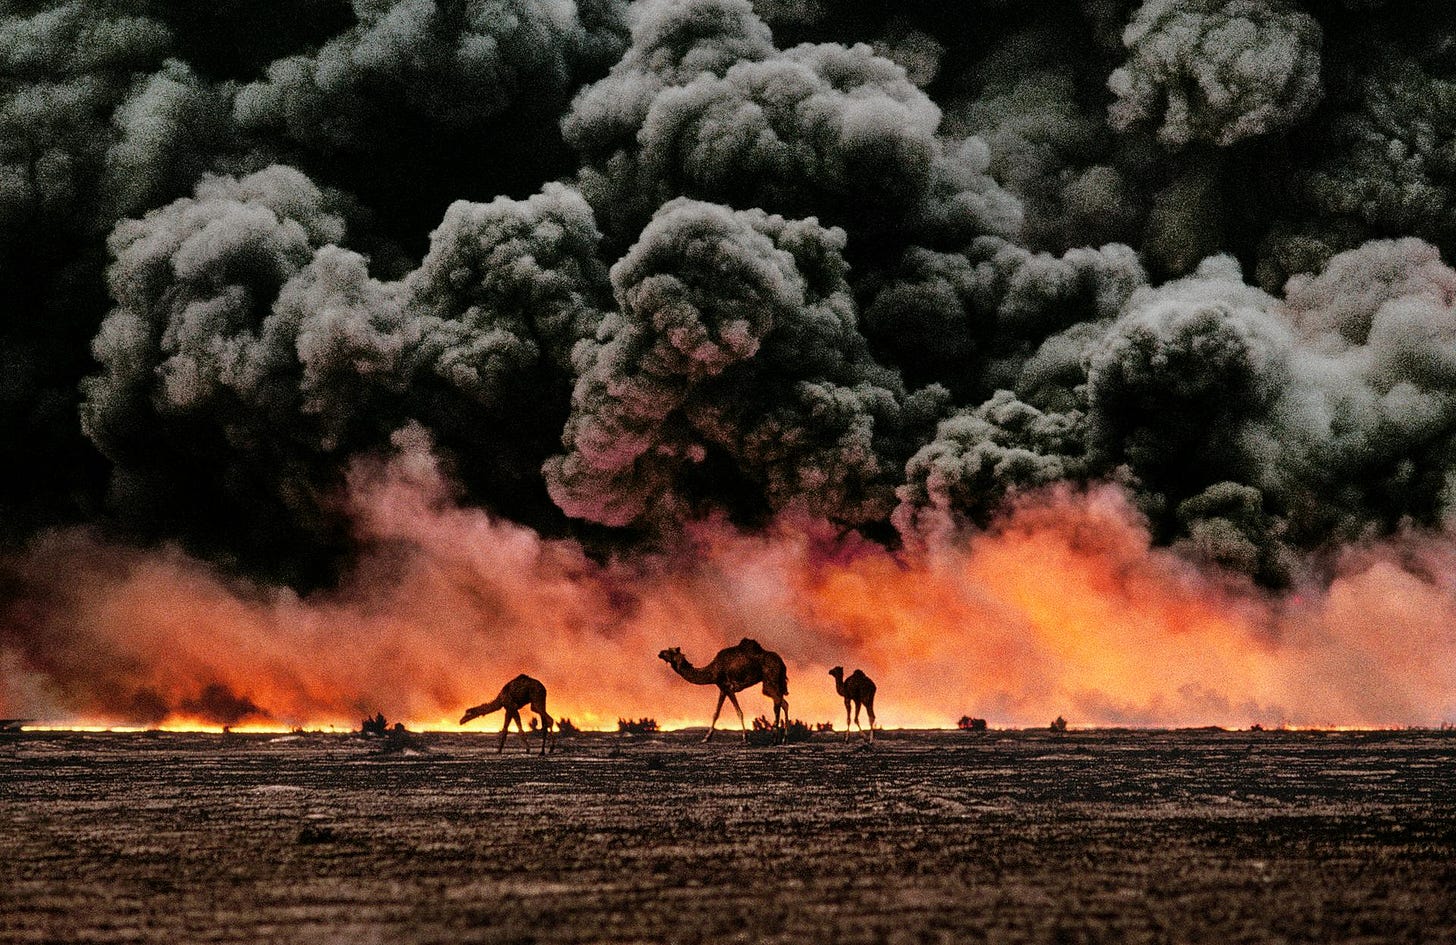 Into the apocalypse: Kuwaitis recall the desperate struggle to control the  1991 oil fires